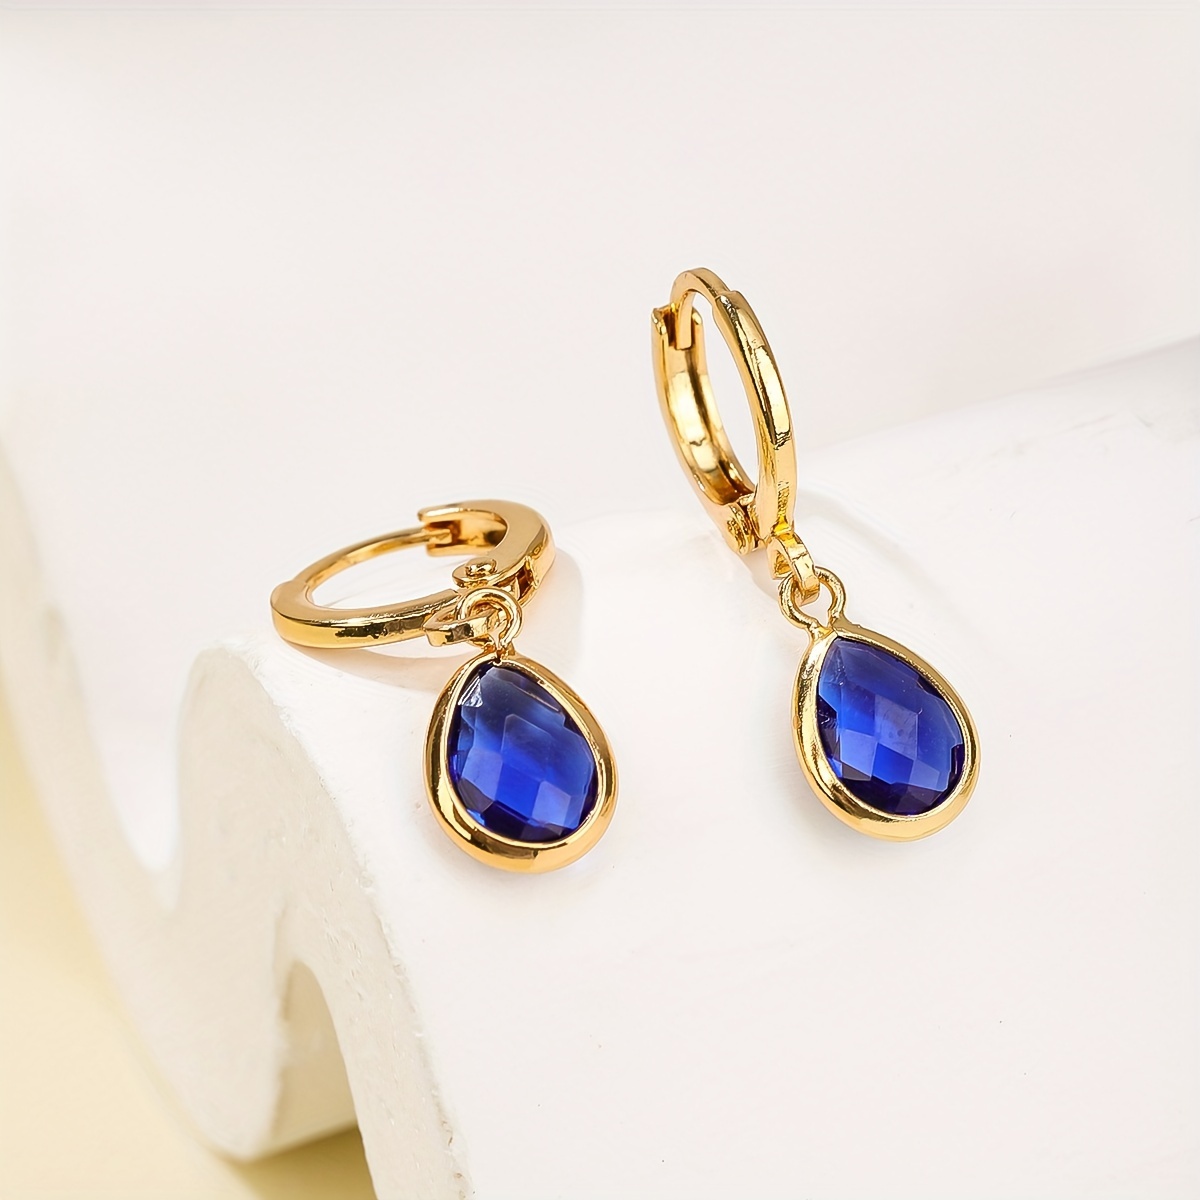 

1 Pair Of Drop Earrings 18k Gold Plated Inlaid Blue Zirconia In Waterdrop Shape Match Daily Outfits Party Accessories